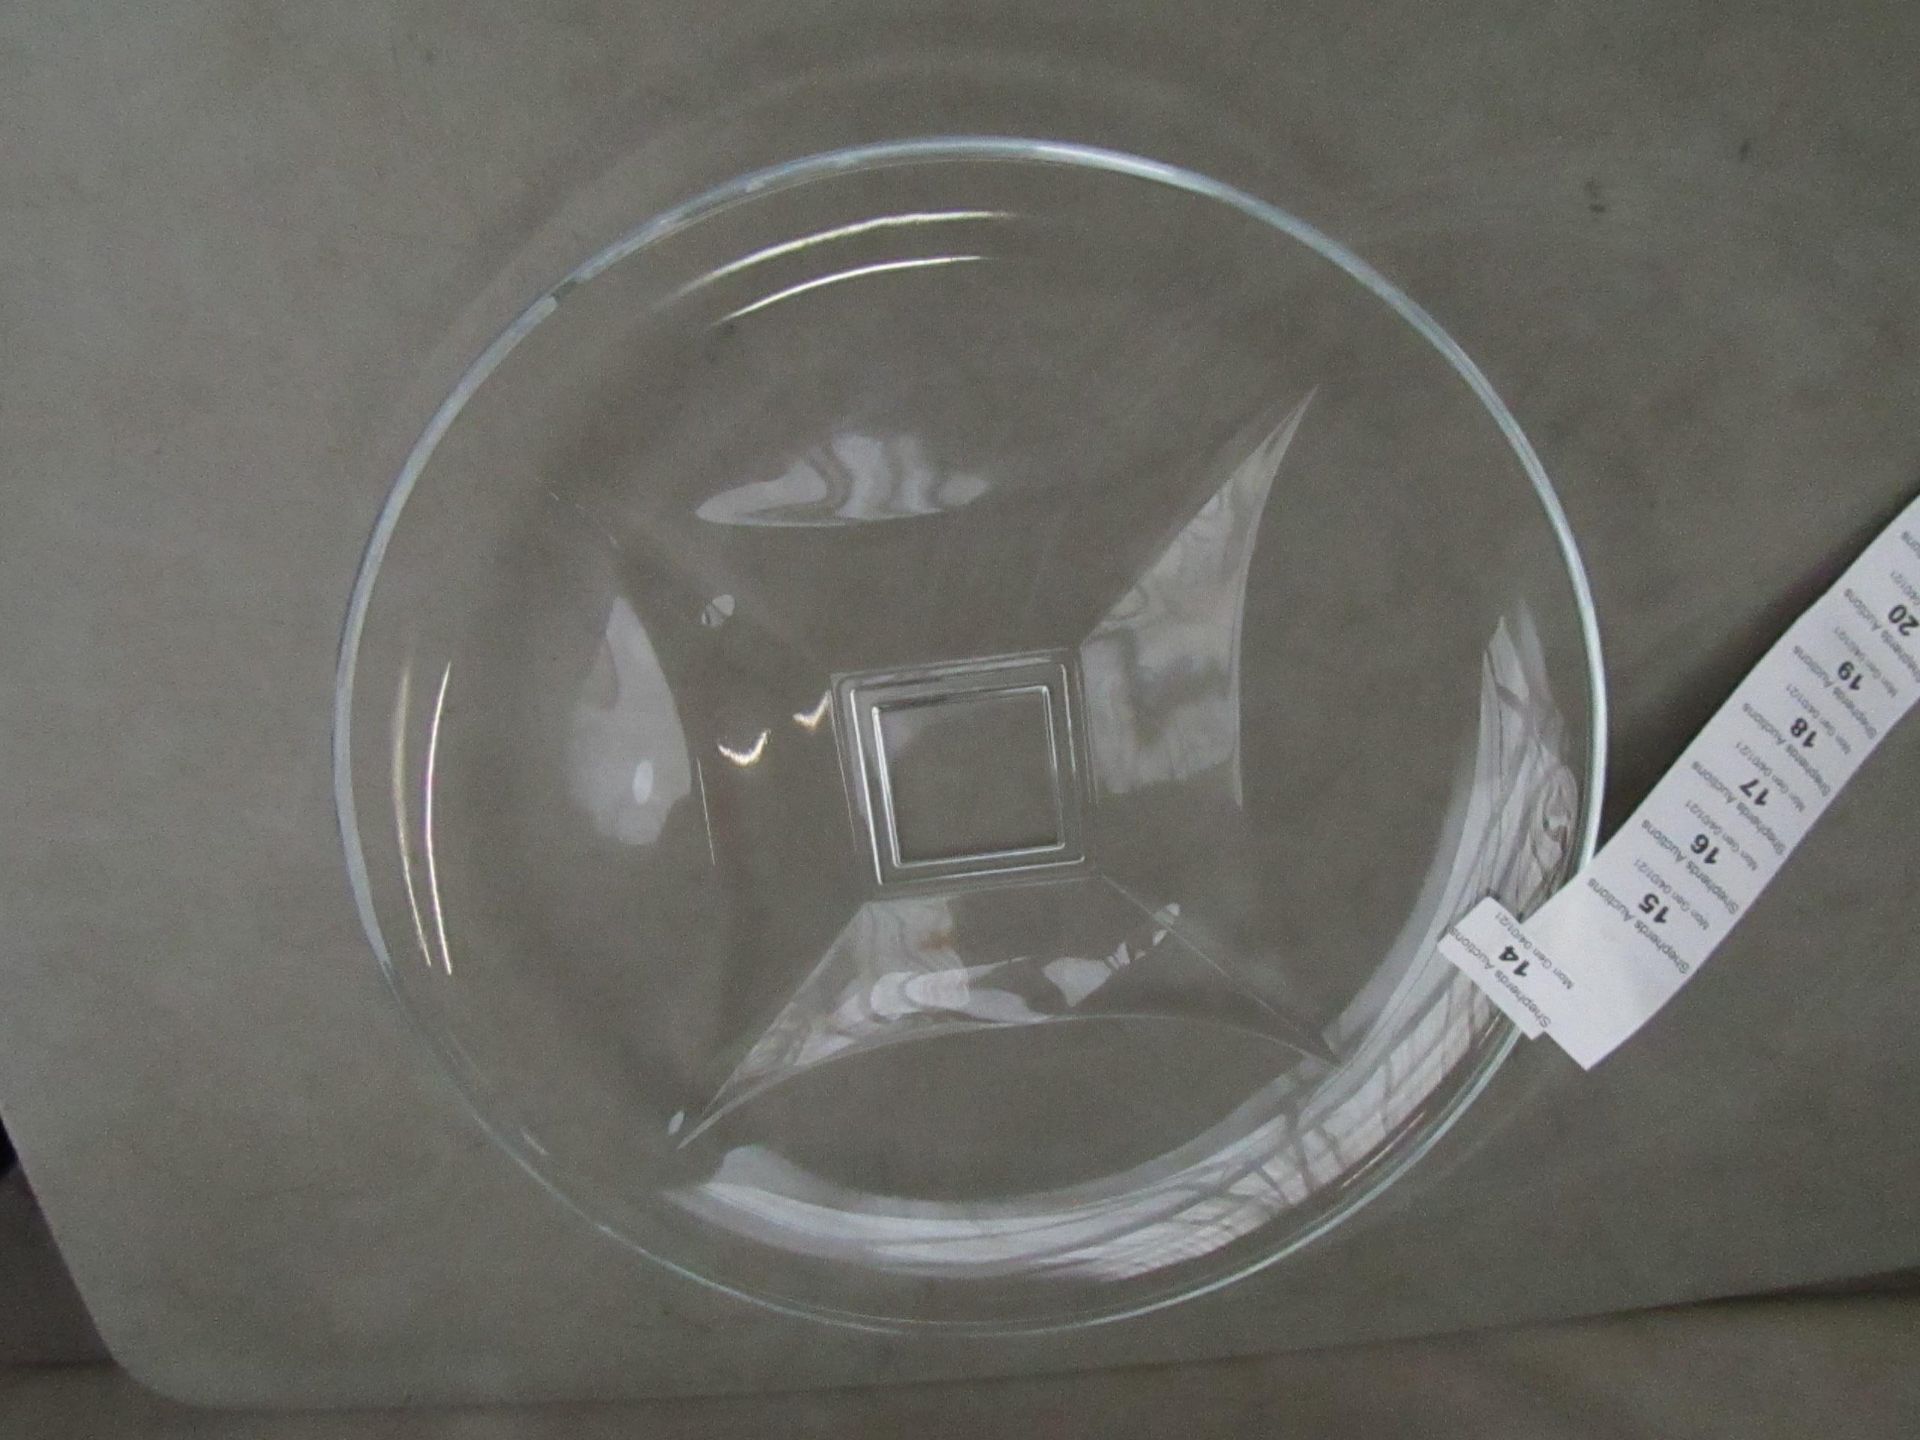 2x Large Glass Plate - New, Good Condition.